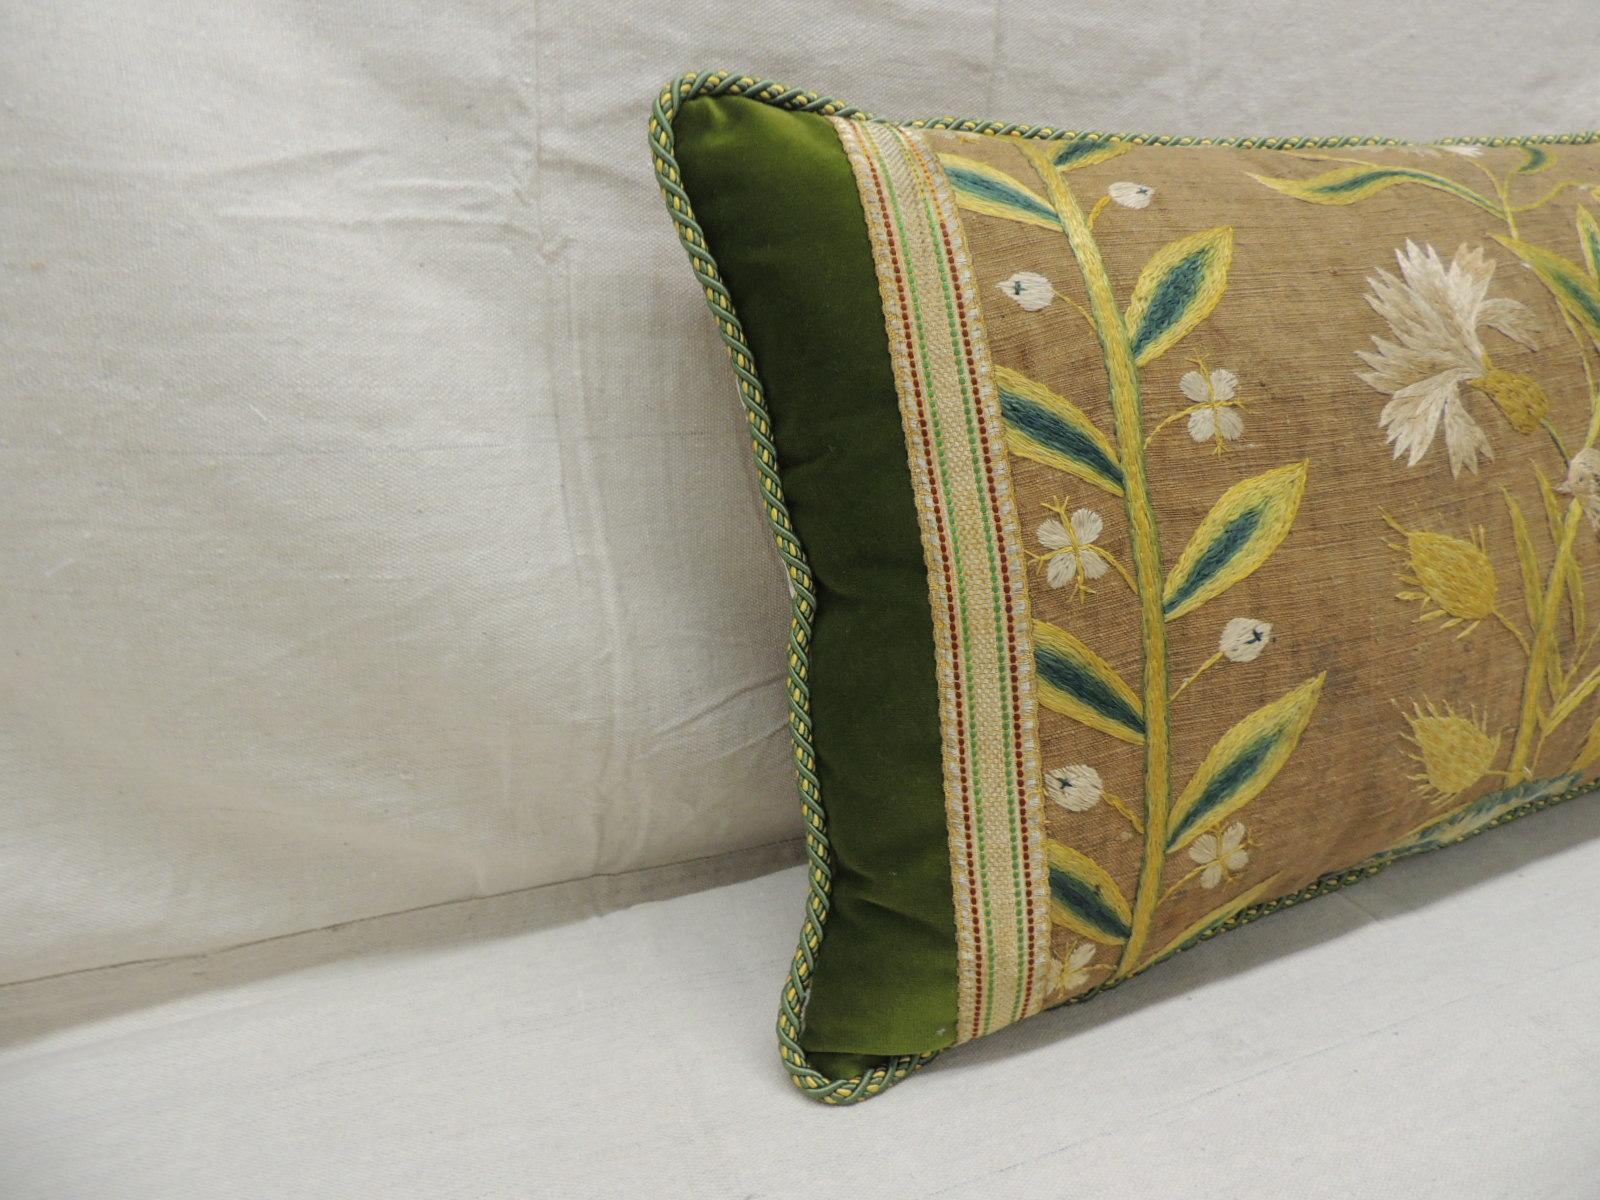 Antique Venetian yellow and green floral embroidered bolster decorative pillow.
Italian floral silk floss thread embroidered on linen.
Embellish with antique gold military style metallic threads flat trim.
Framed with hunter green silk velvet